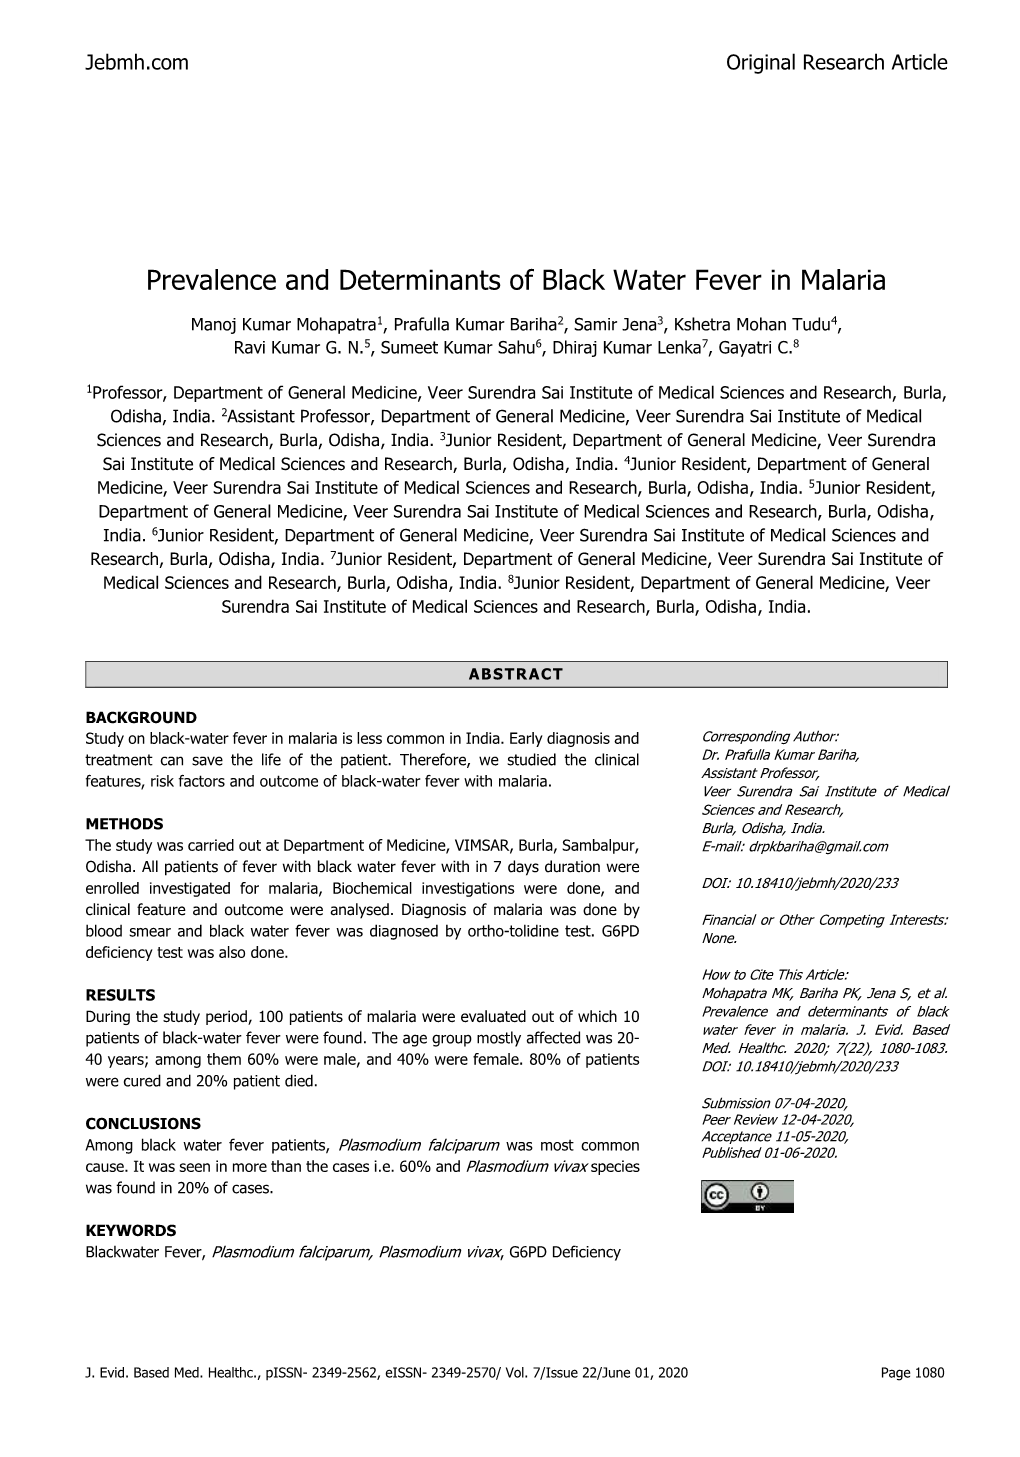 Prevalence and Determinants of Black Water Fever in Malaria